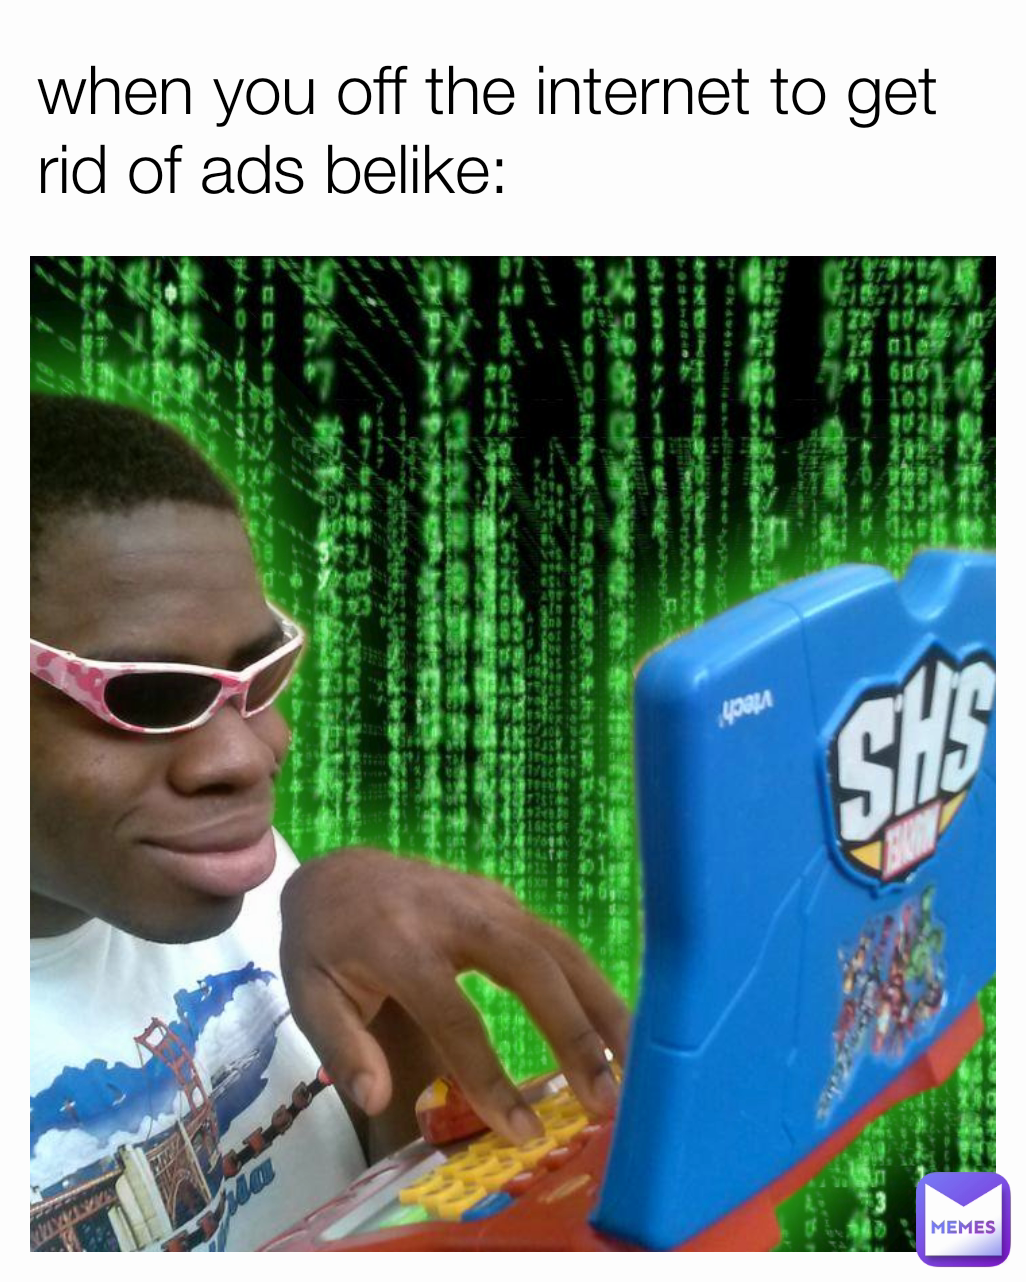 when you off the internet to get rid of ads belike: